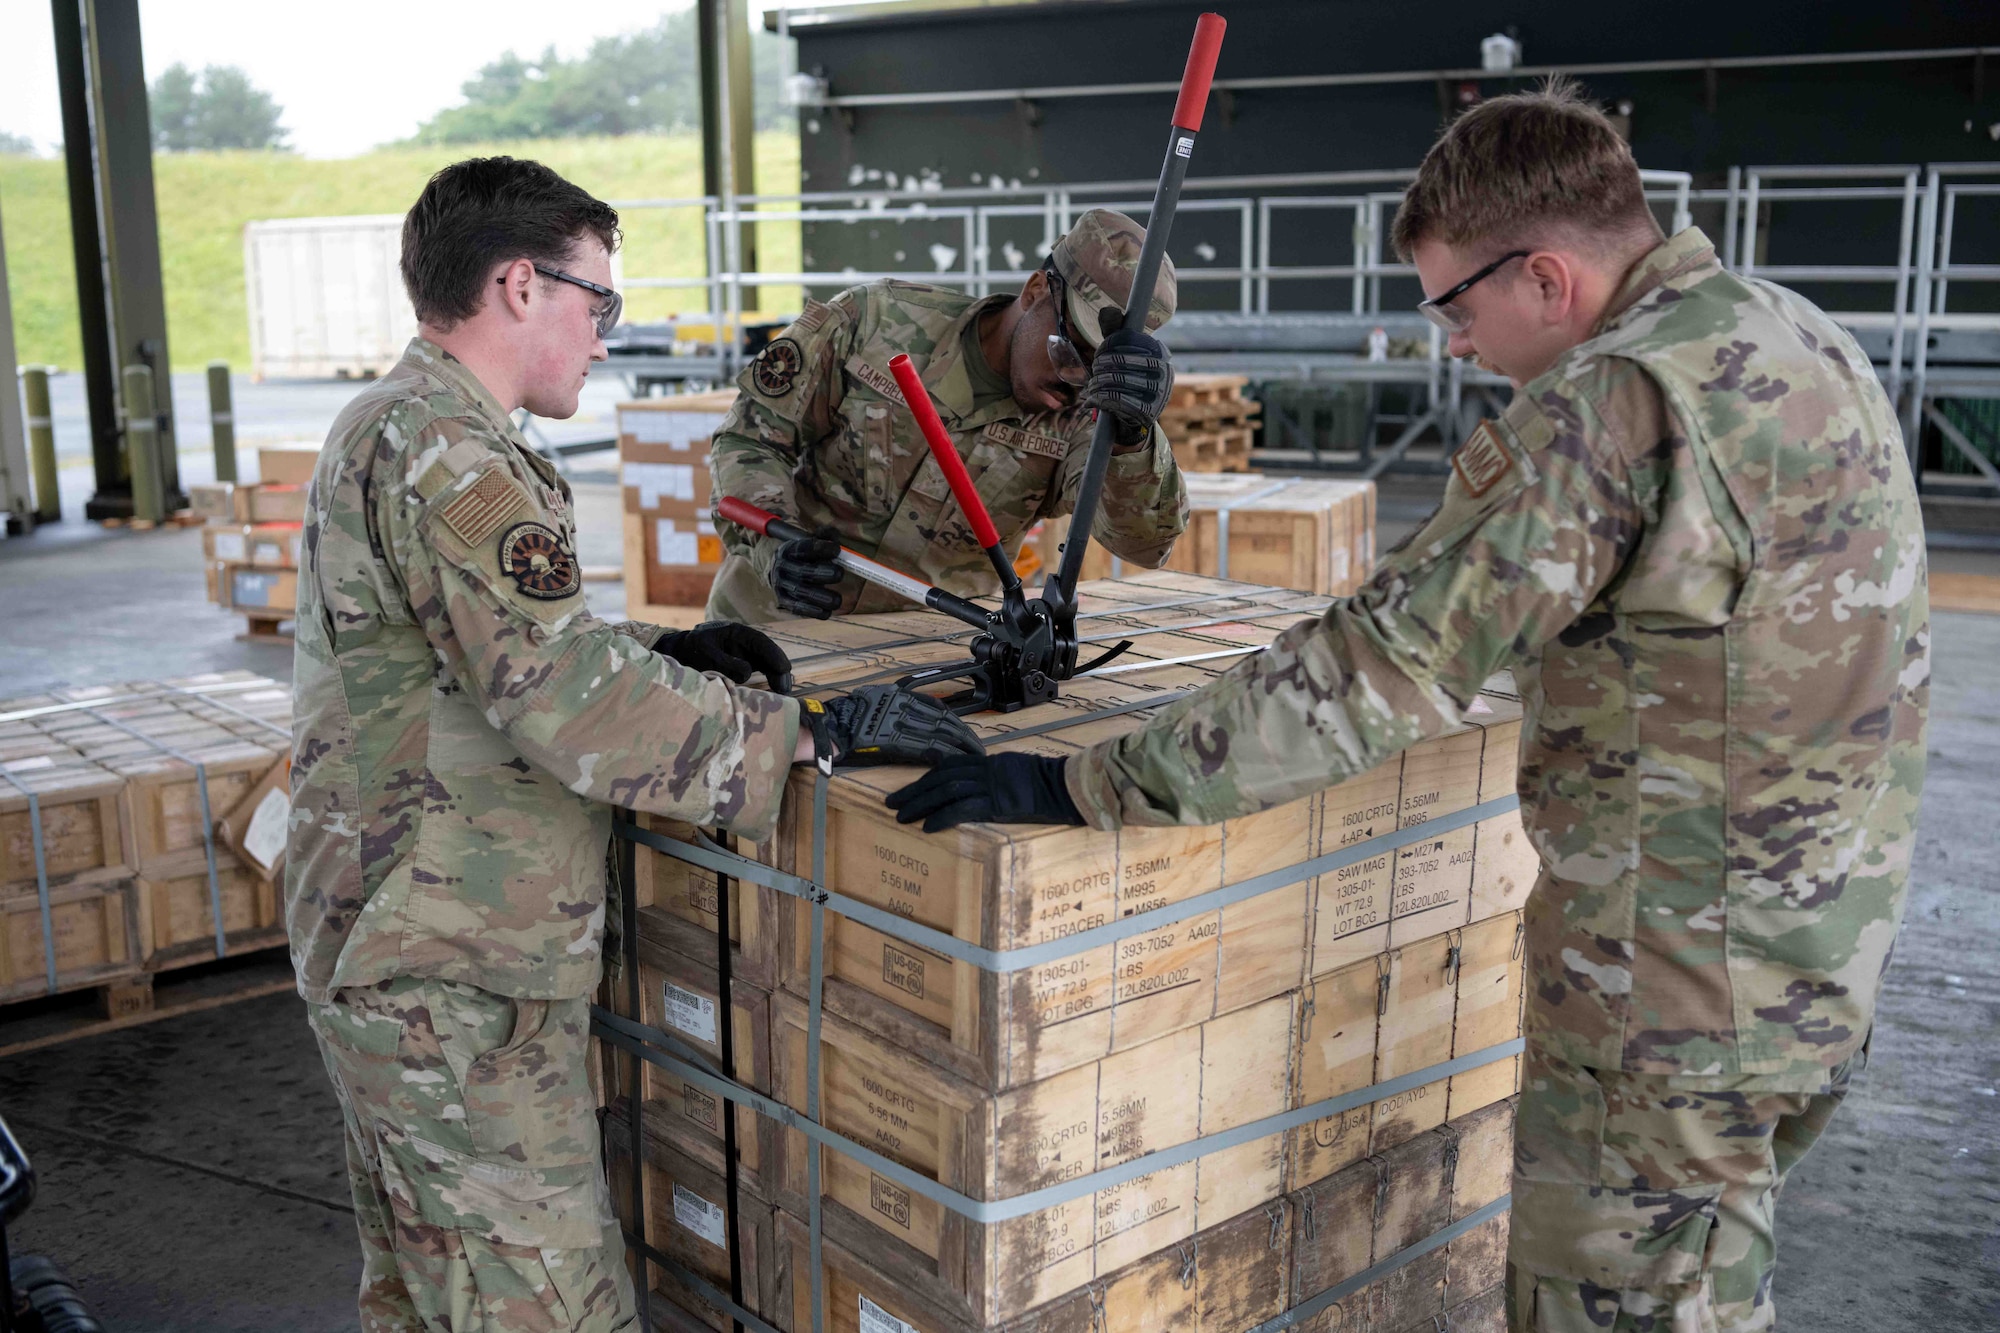 A military member tightens a metal band around a pallet to secure it and makes sure nothing falls off.